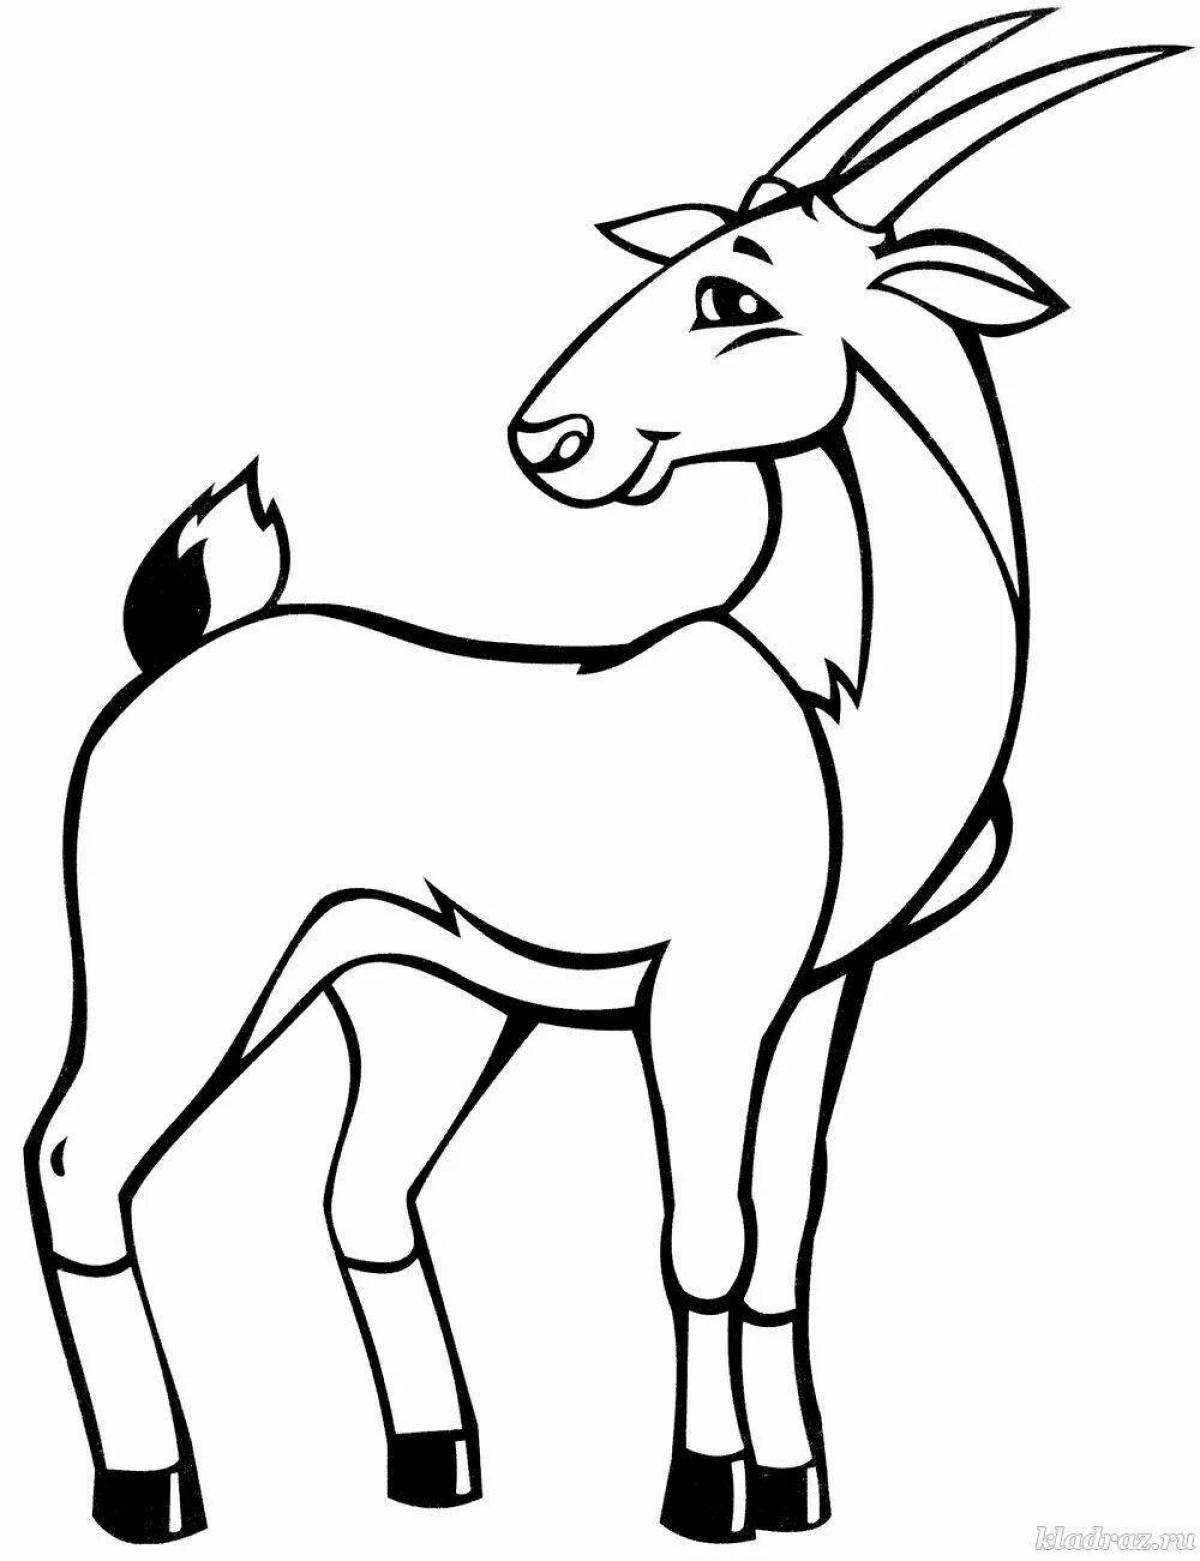 Adorable antelope coloring book for kids